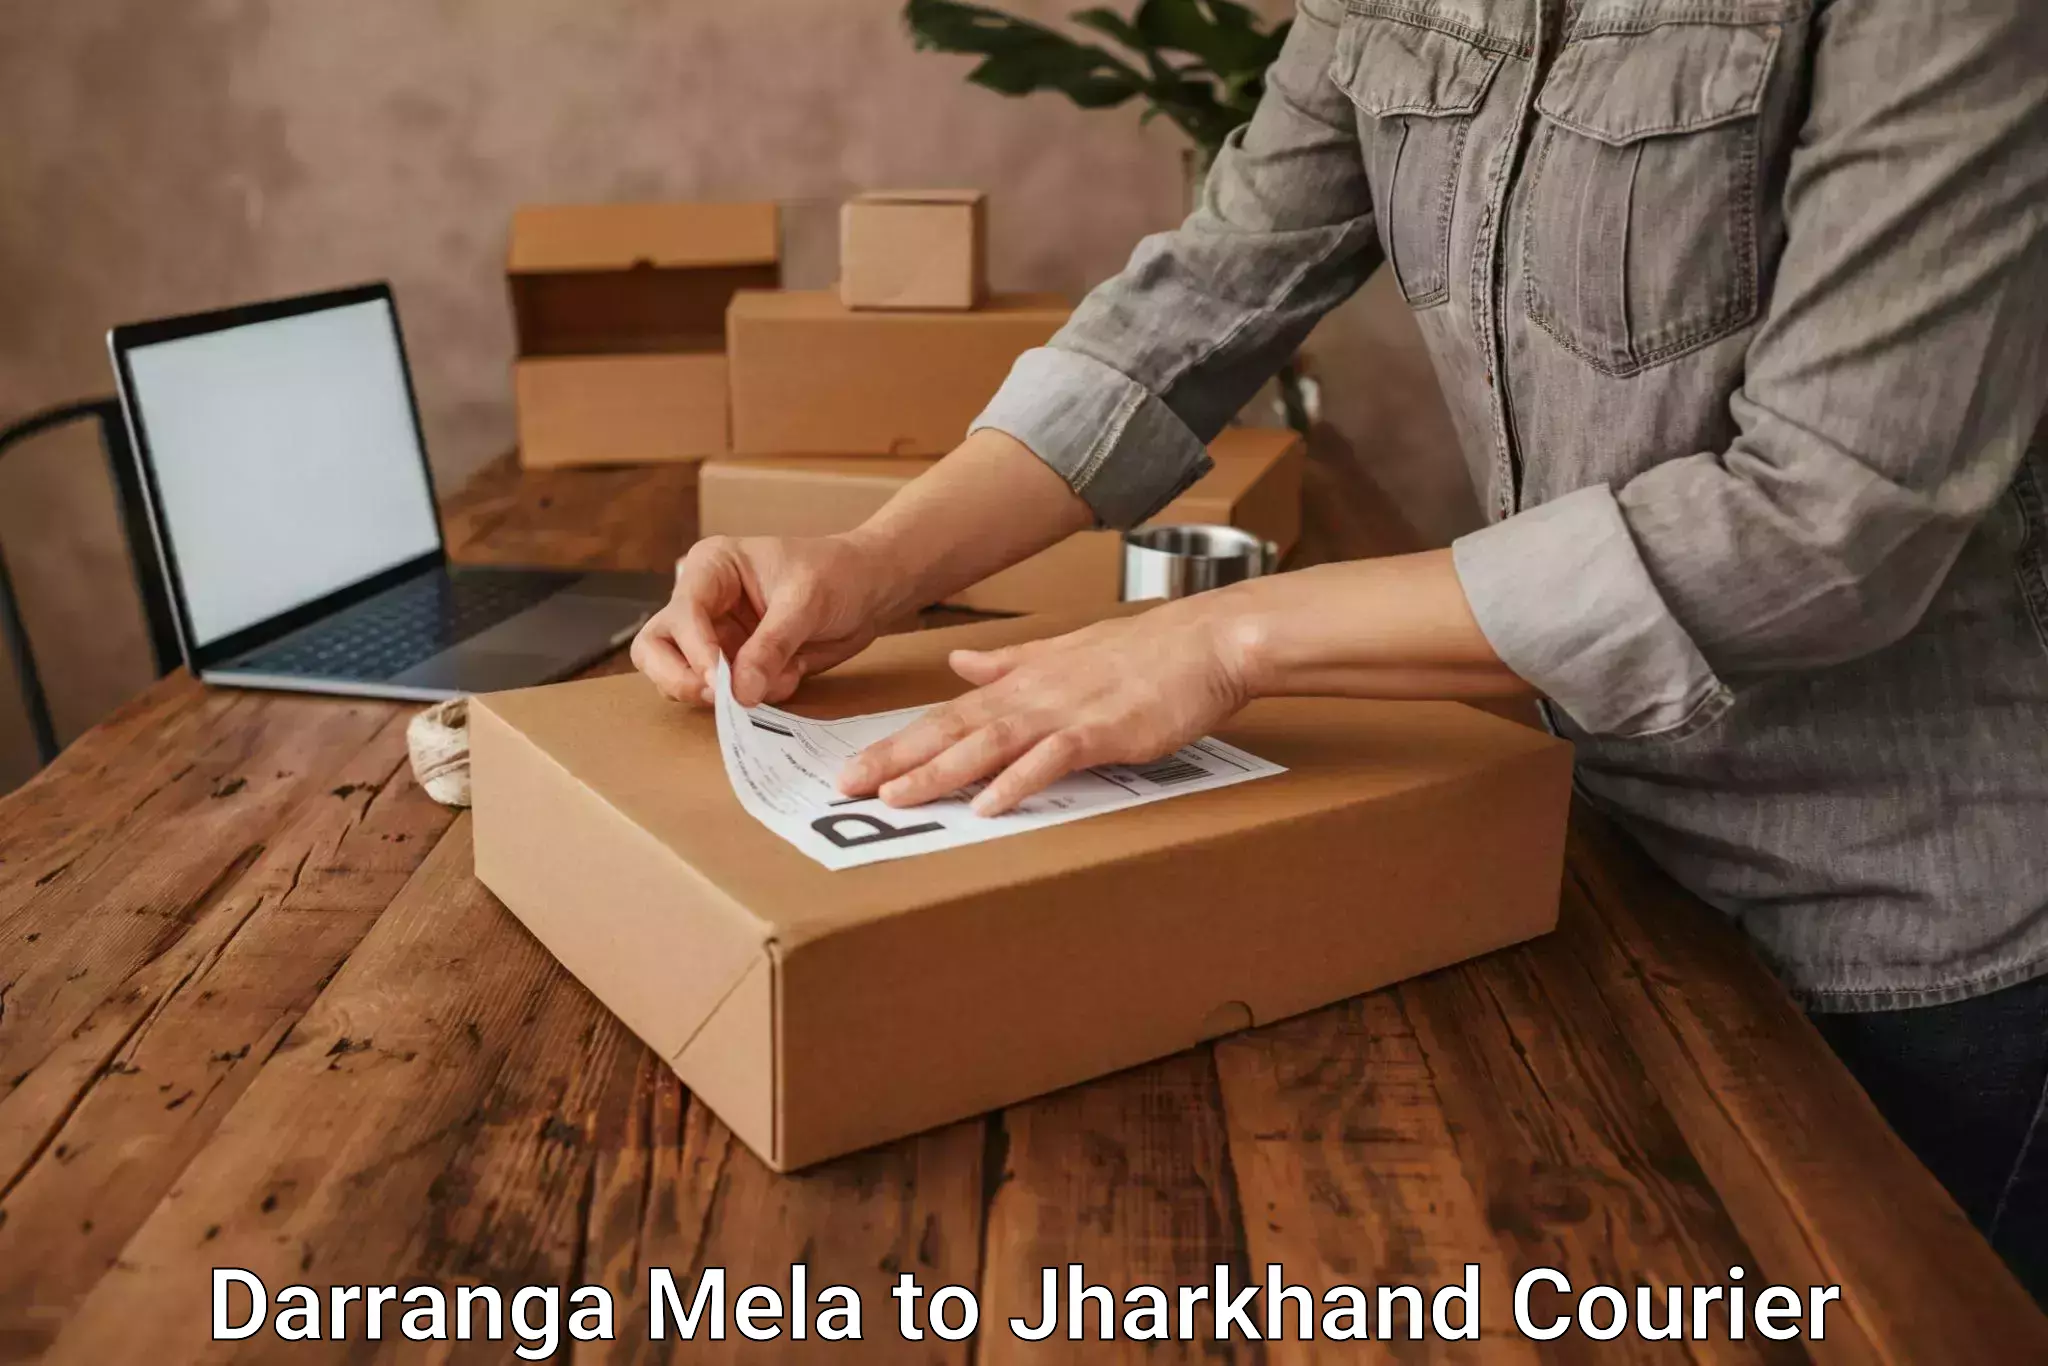 Easy access courier services in Darranga Mela to Chandwa